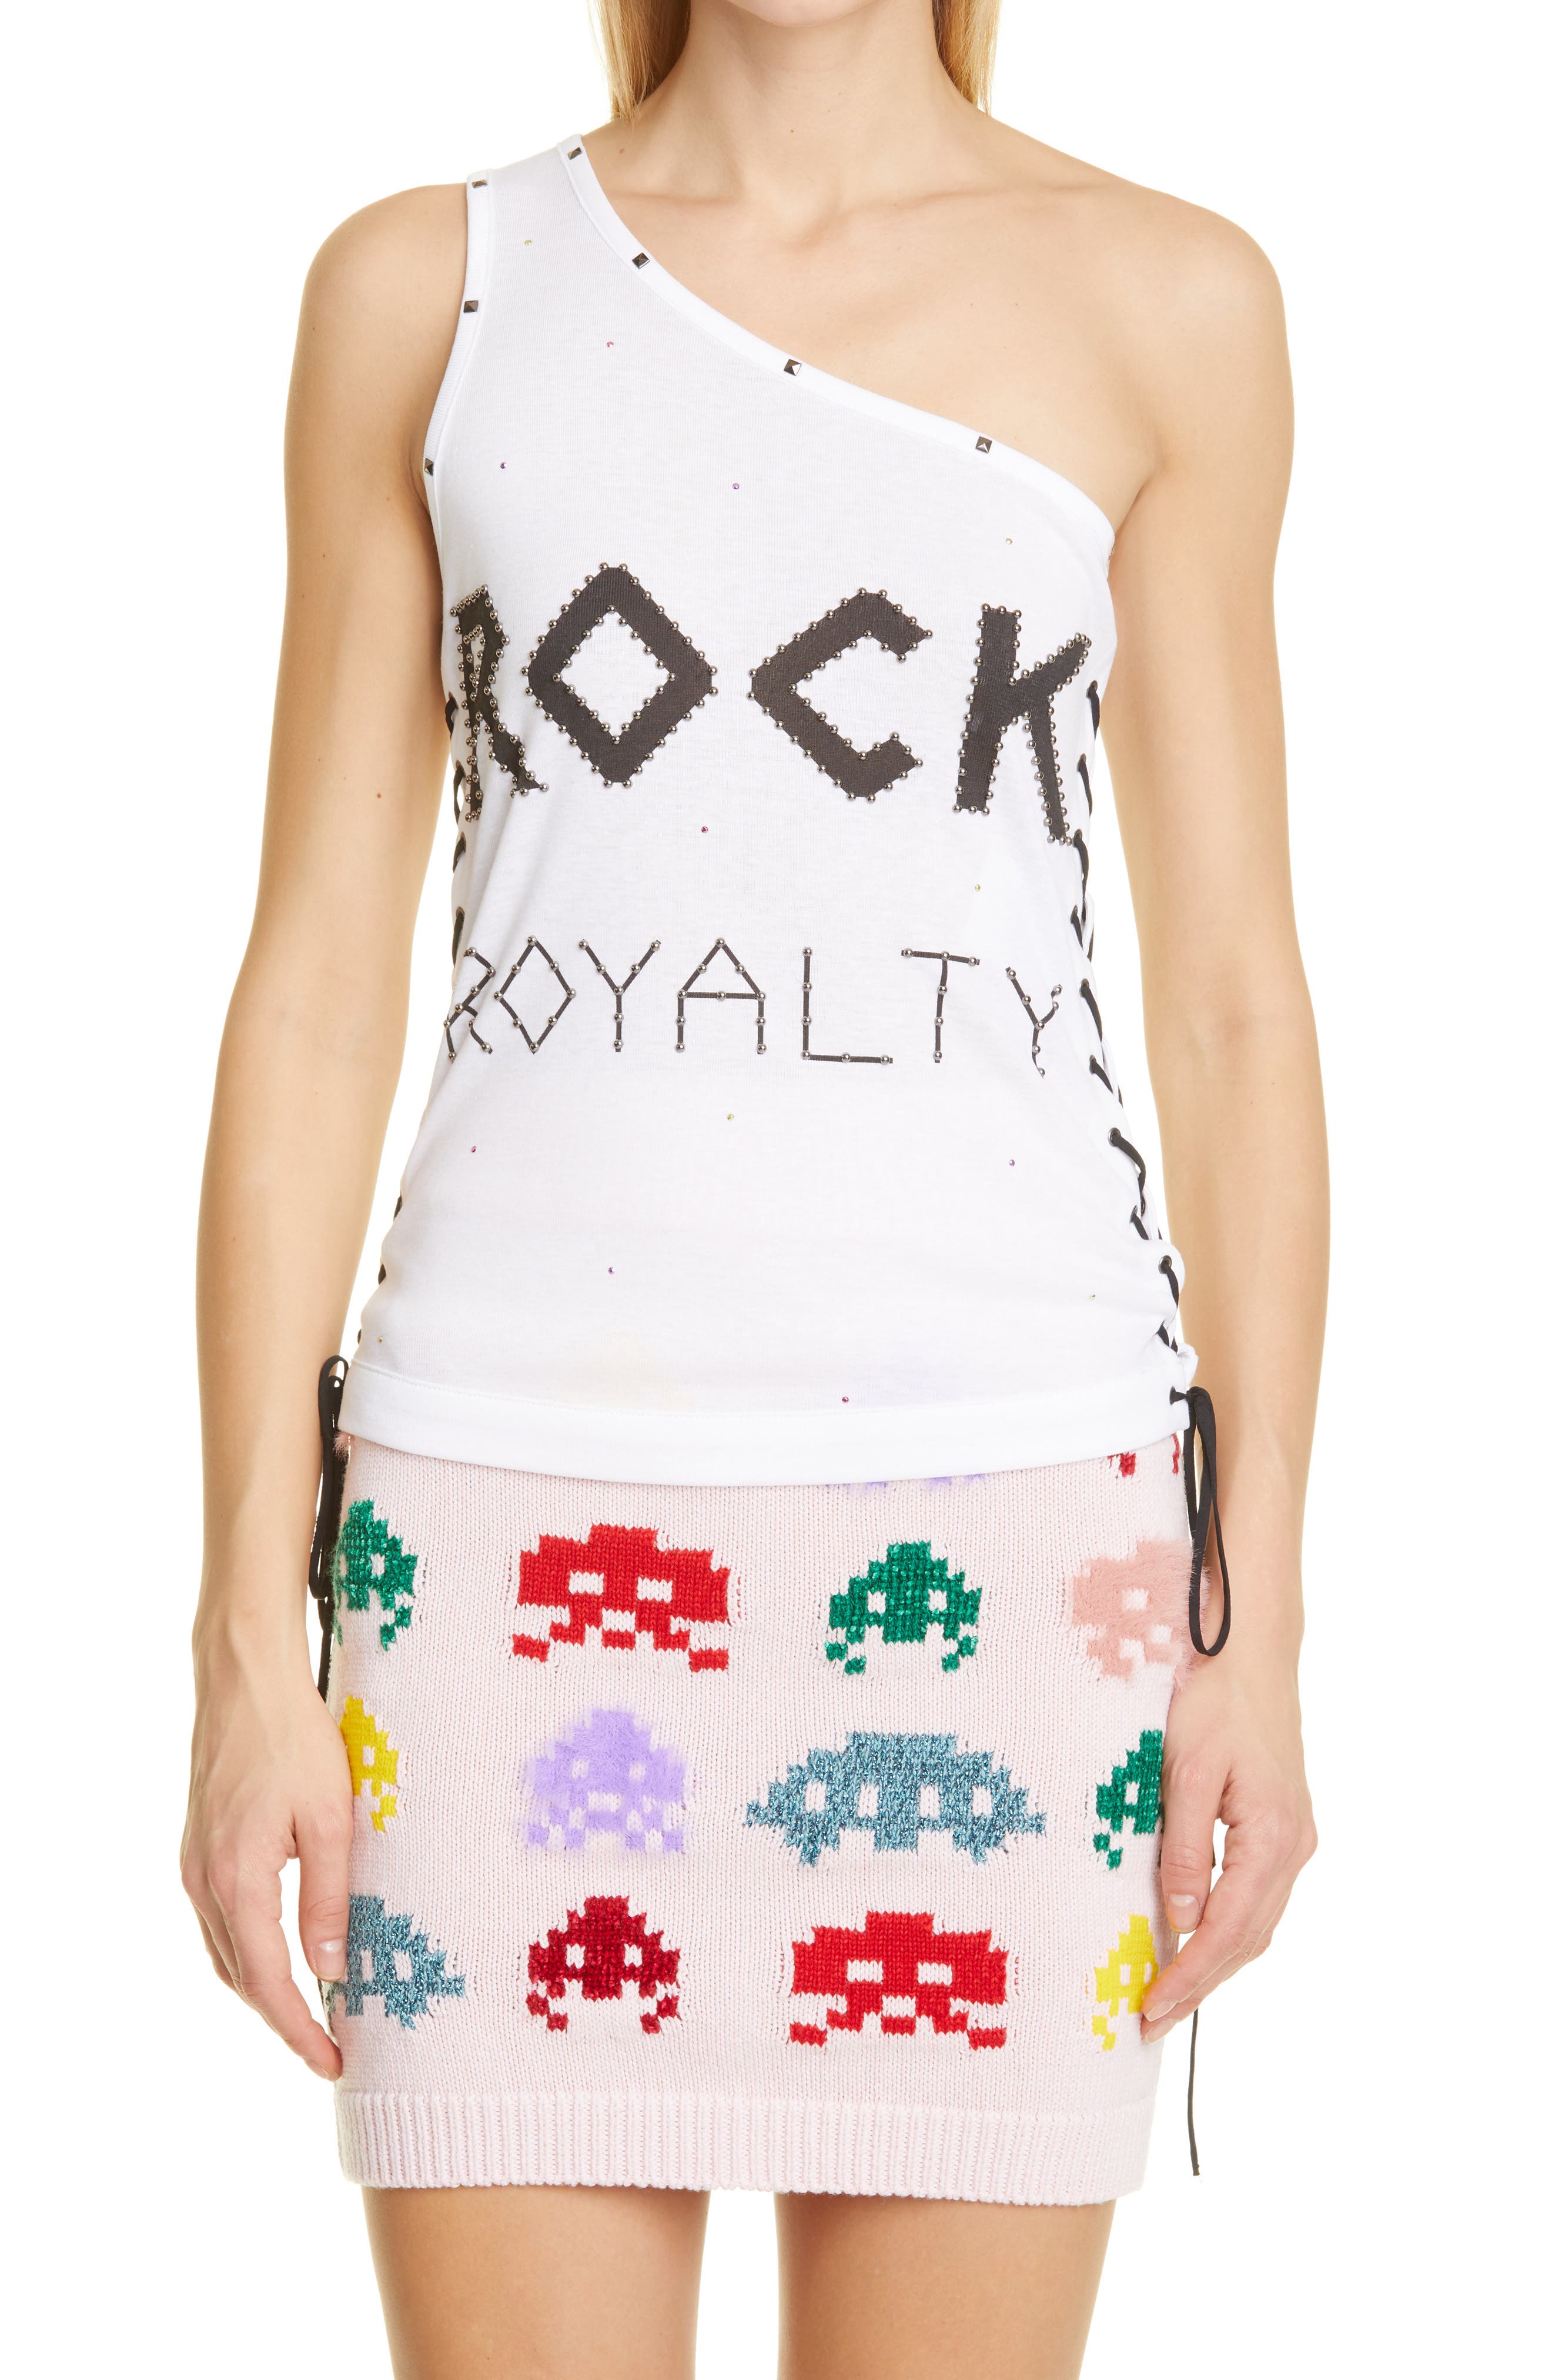 Stella McCartney Rock Royalty One-Shoulder Graphic Tee in Pure White at Nordstrom, Size 4 Us